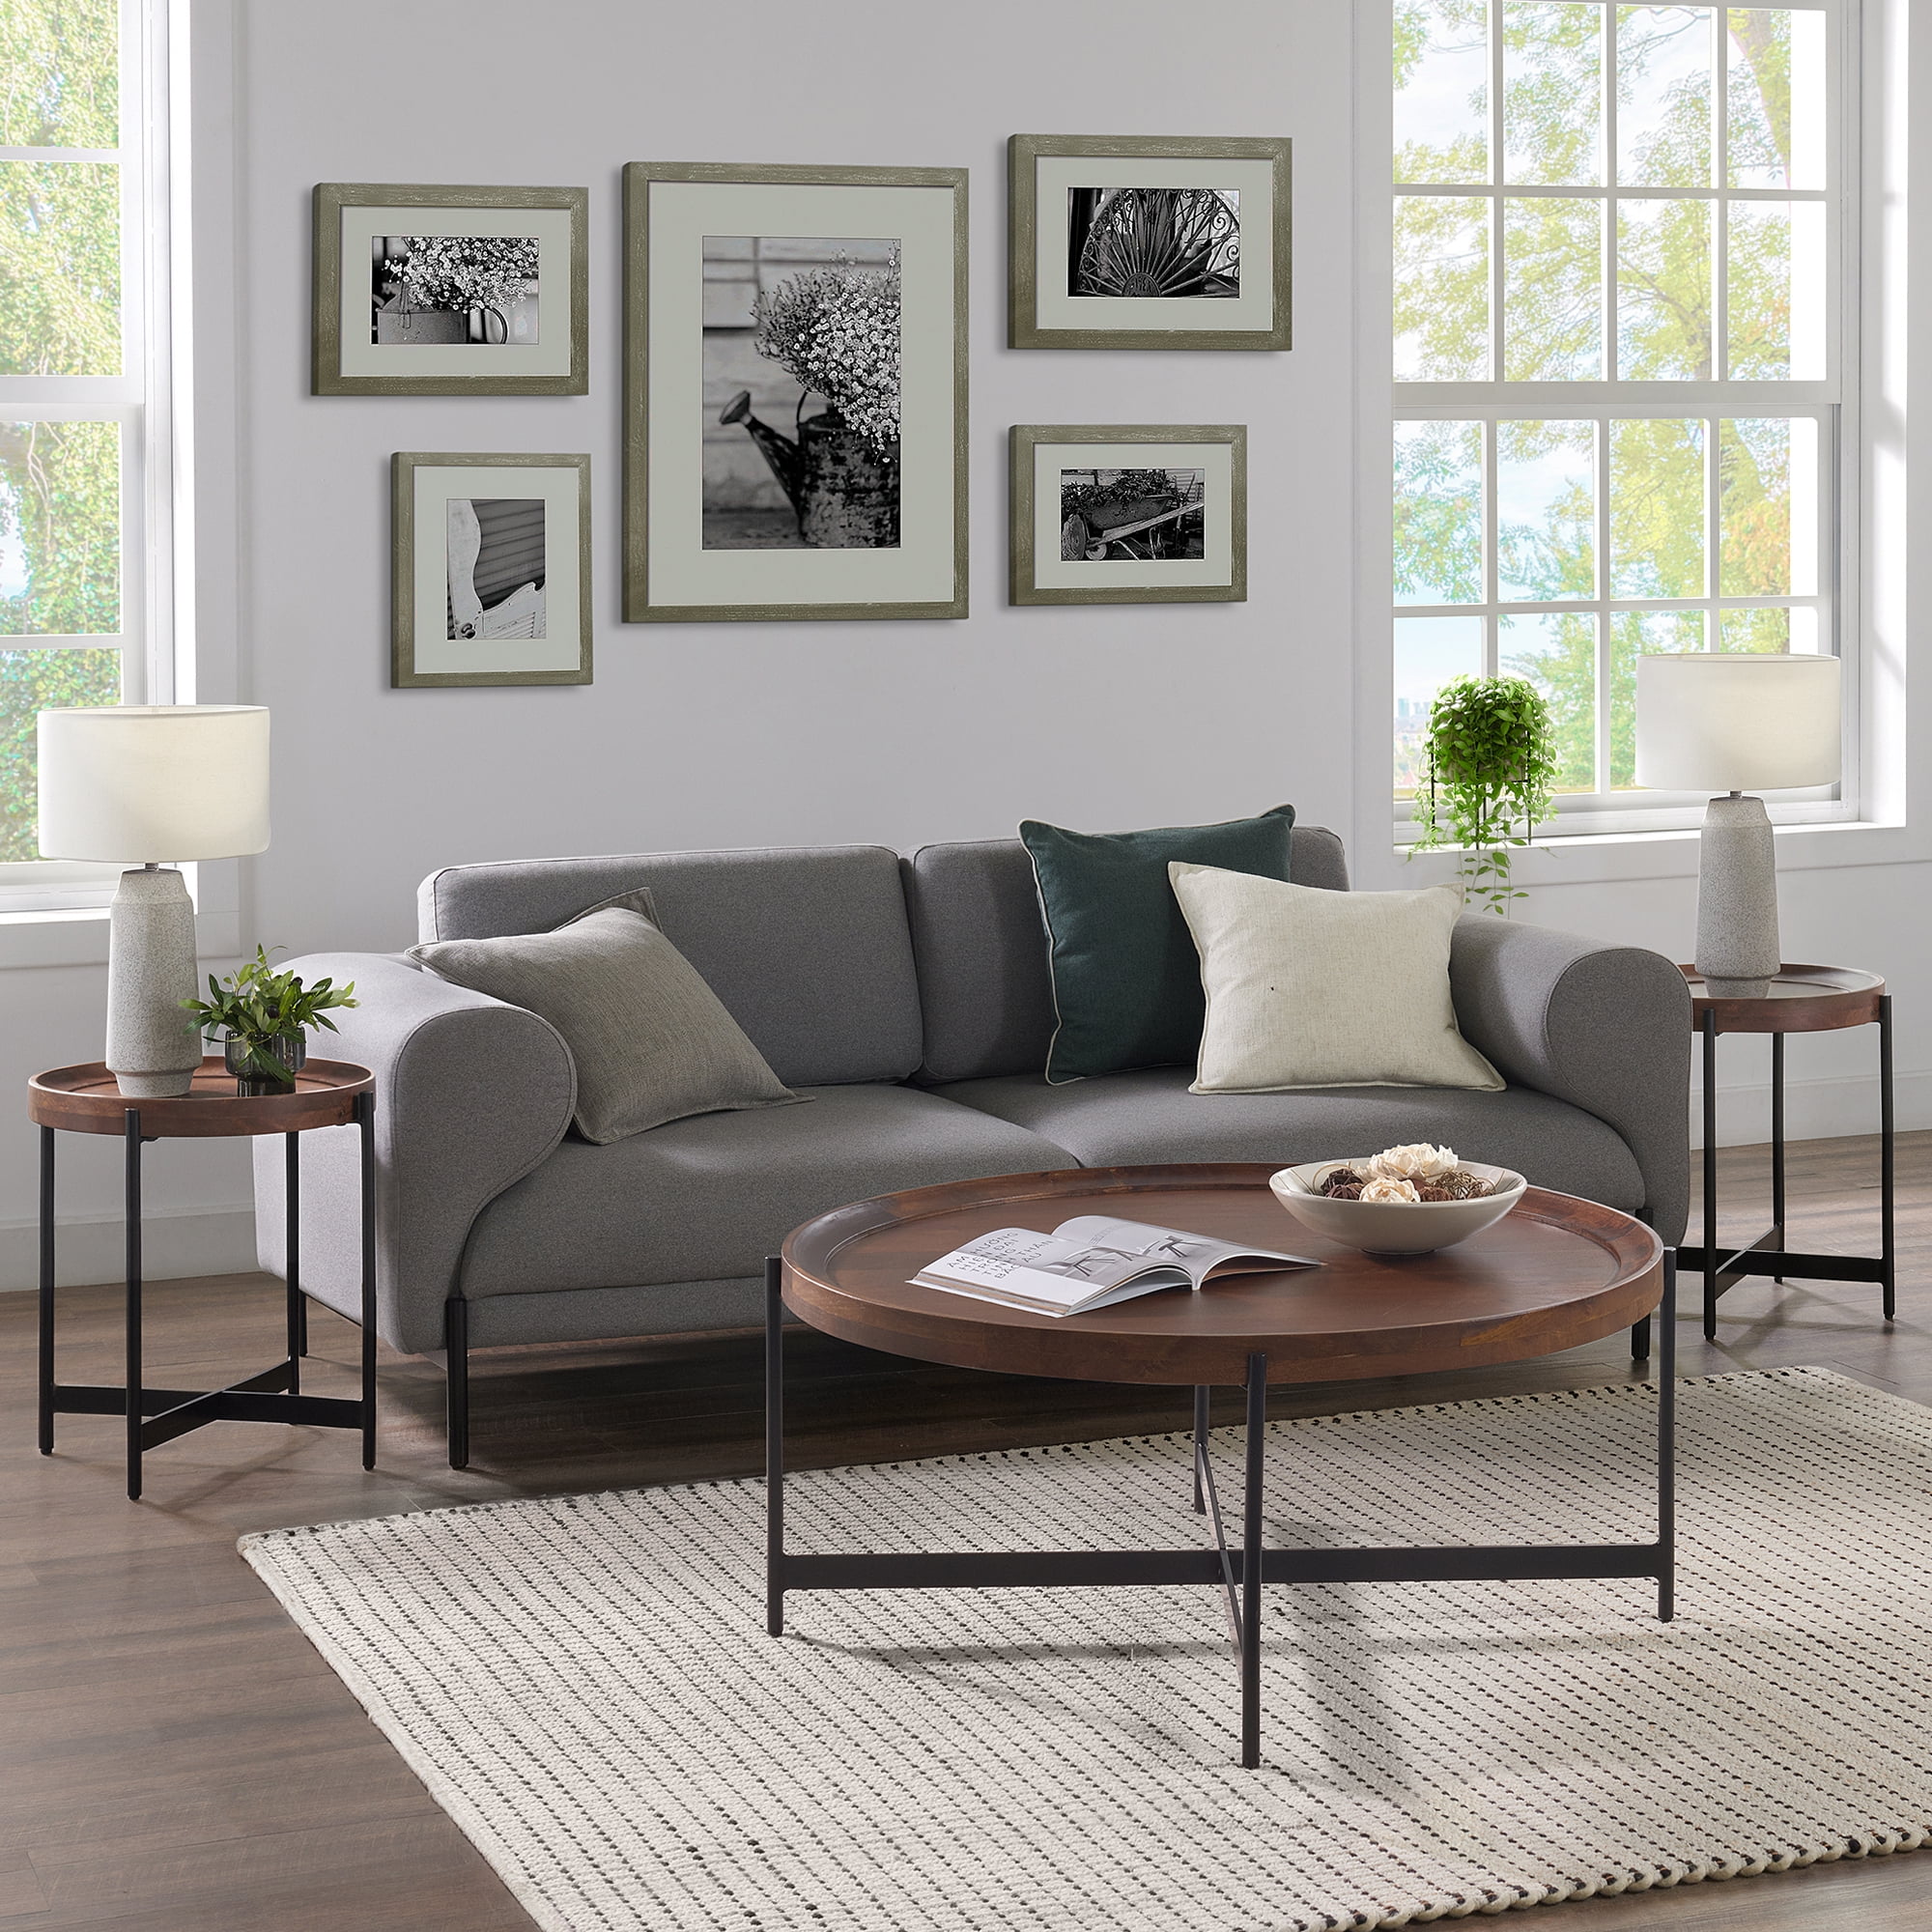 Brookline 3 Piece Living Room Set With, Living Room Coffee Table And End Tables